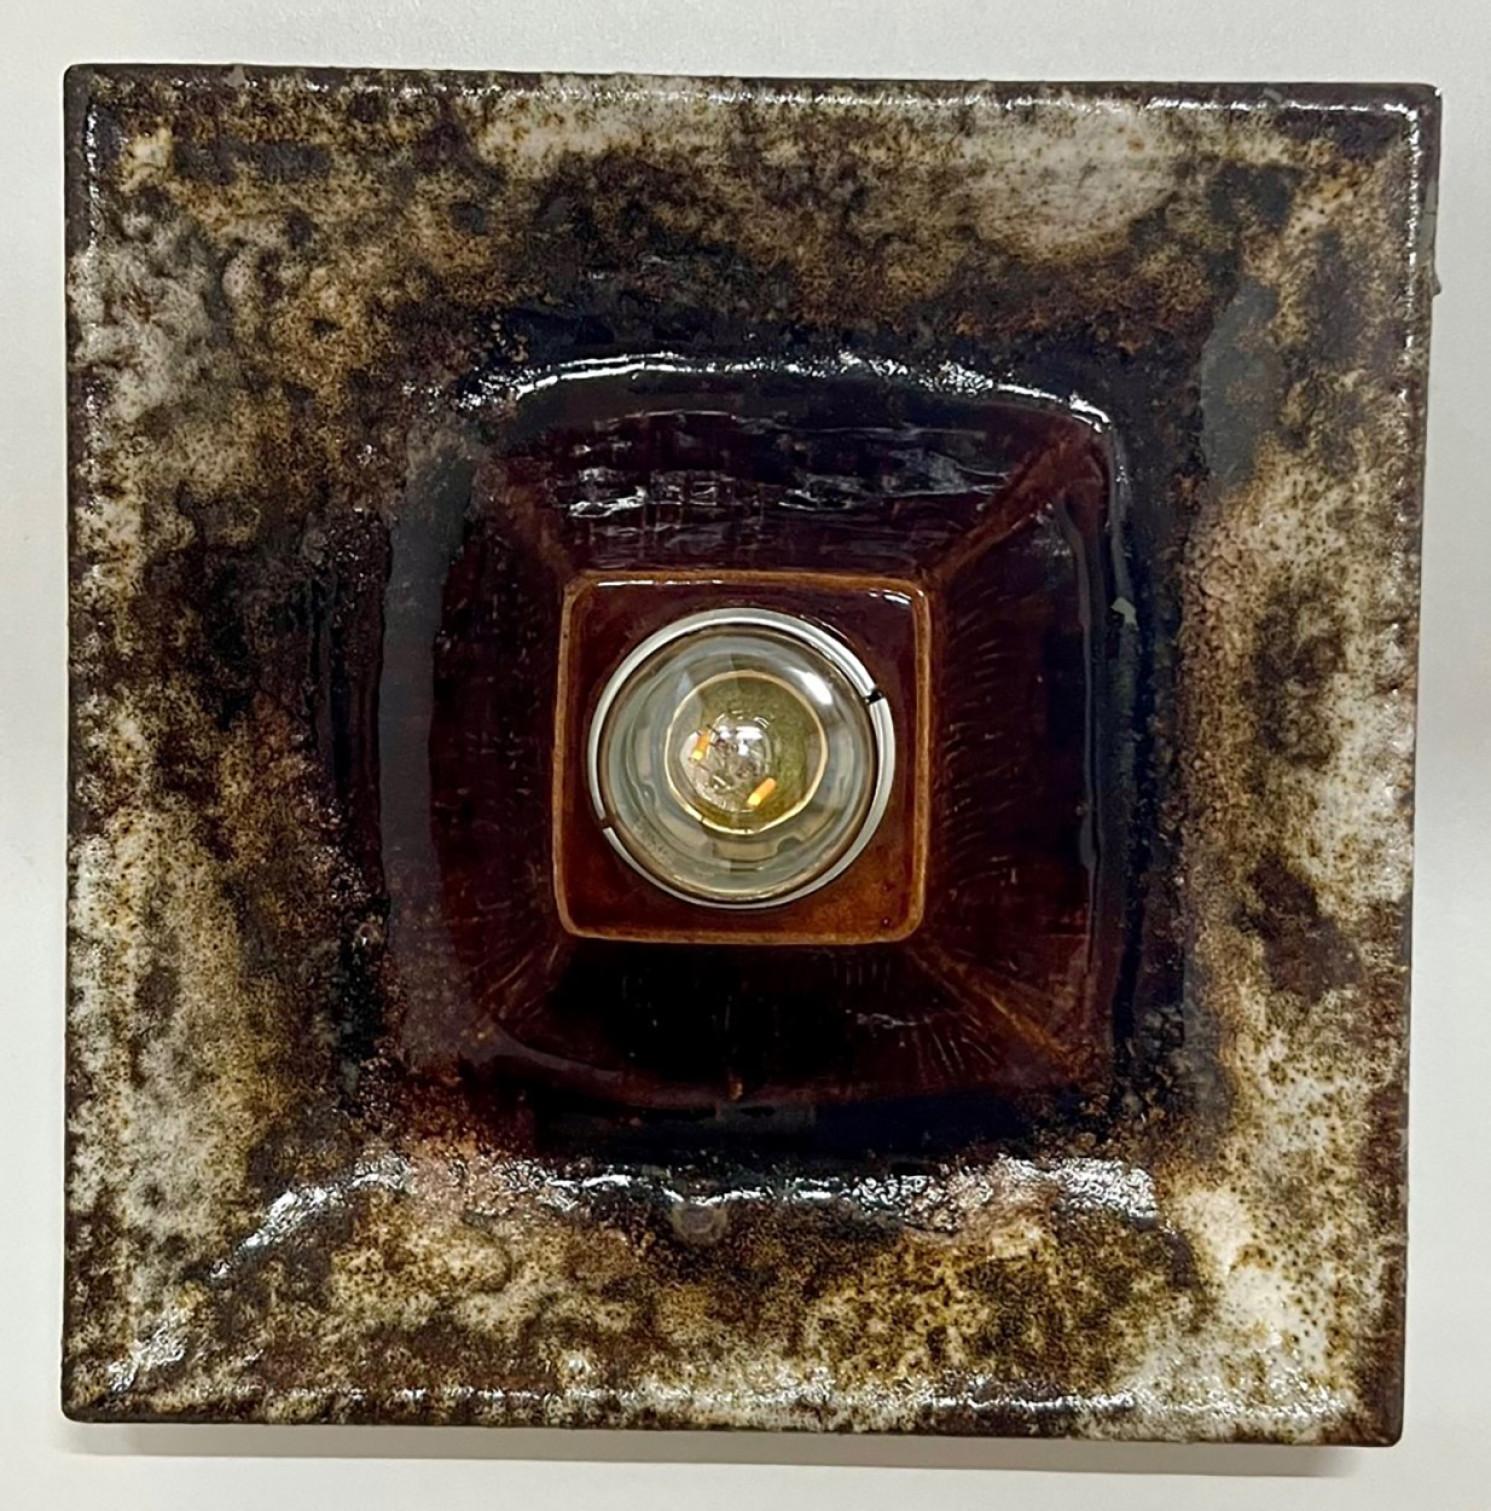 Mid-Century Modern Brown Square Ceramic Wall Lights by Hustadt Keramik, Germany, 1970 For Sale